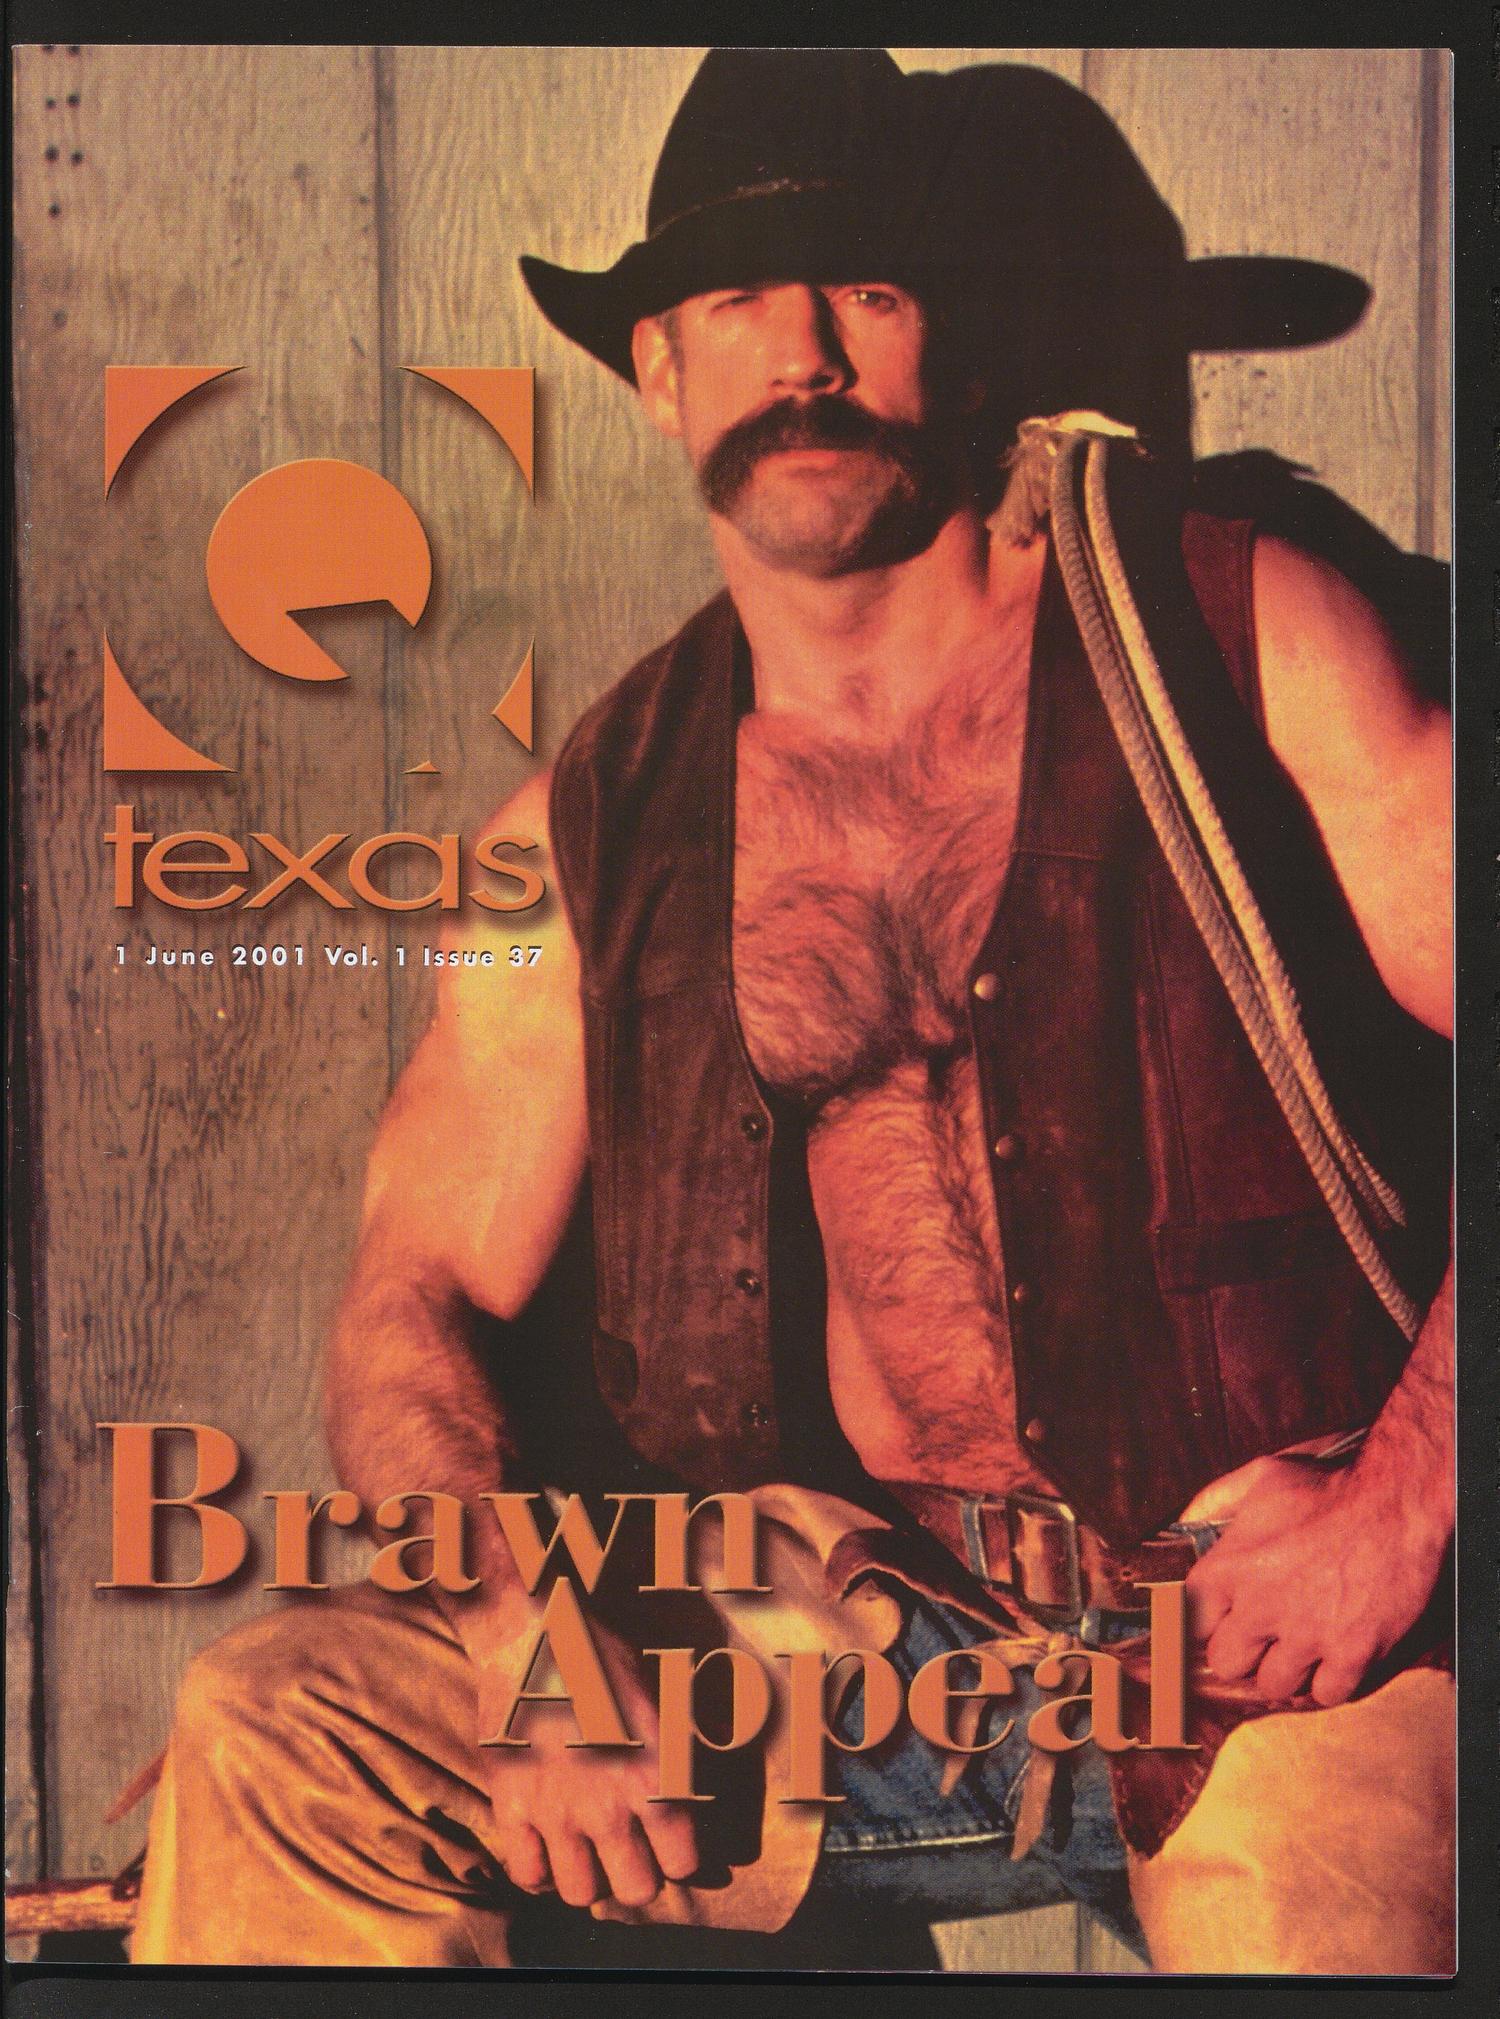 Qtexas, Volume 1, Issue 37, June 1, 2001
                                                
                                                    Front Cover
                                                